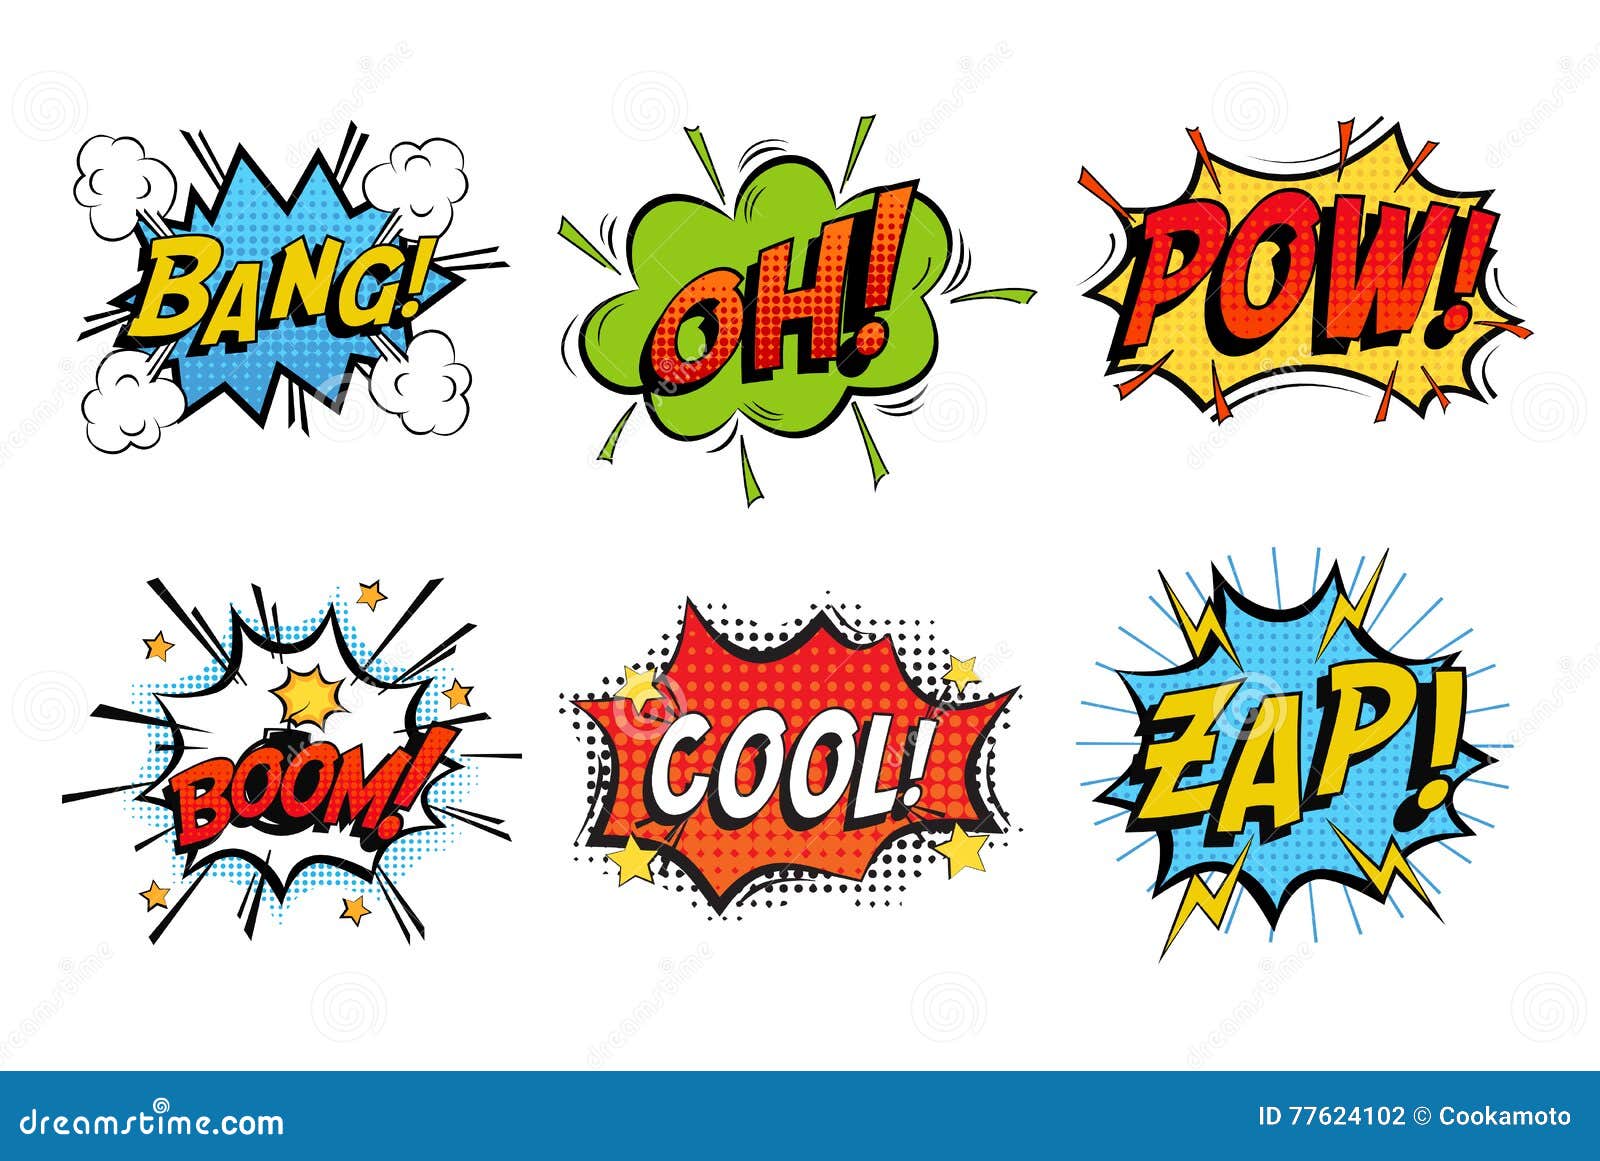 emotions for comics speech like bang and cool